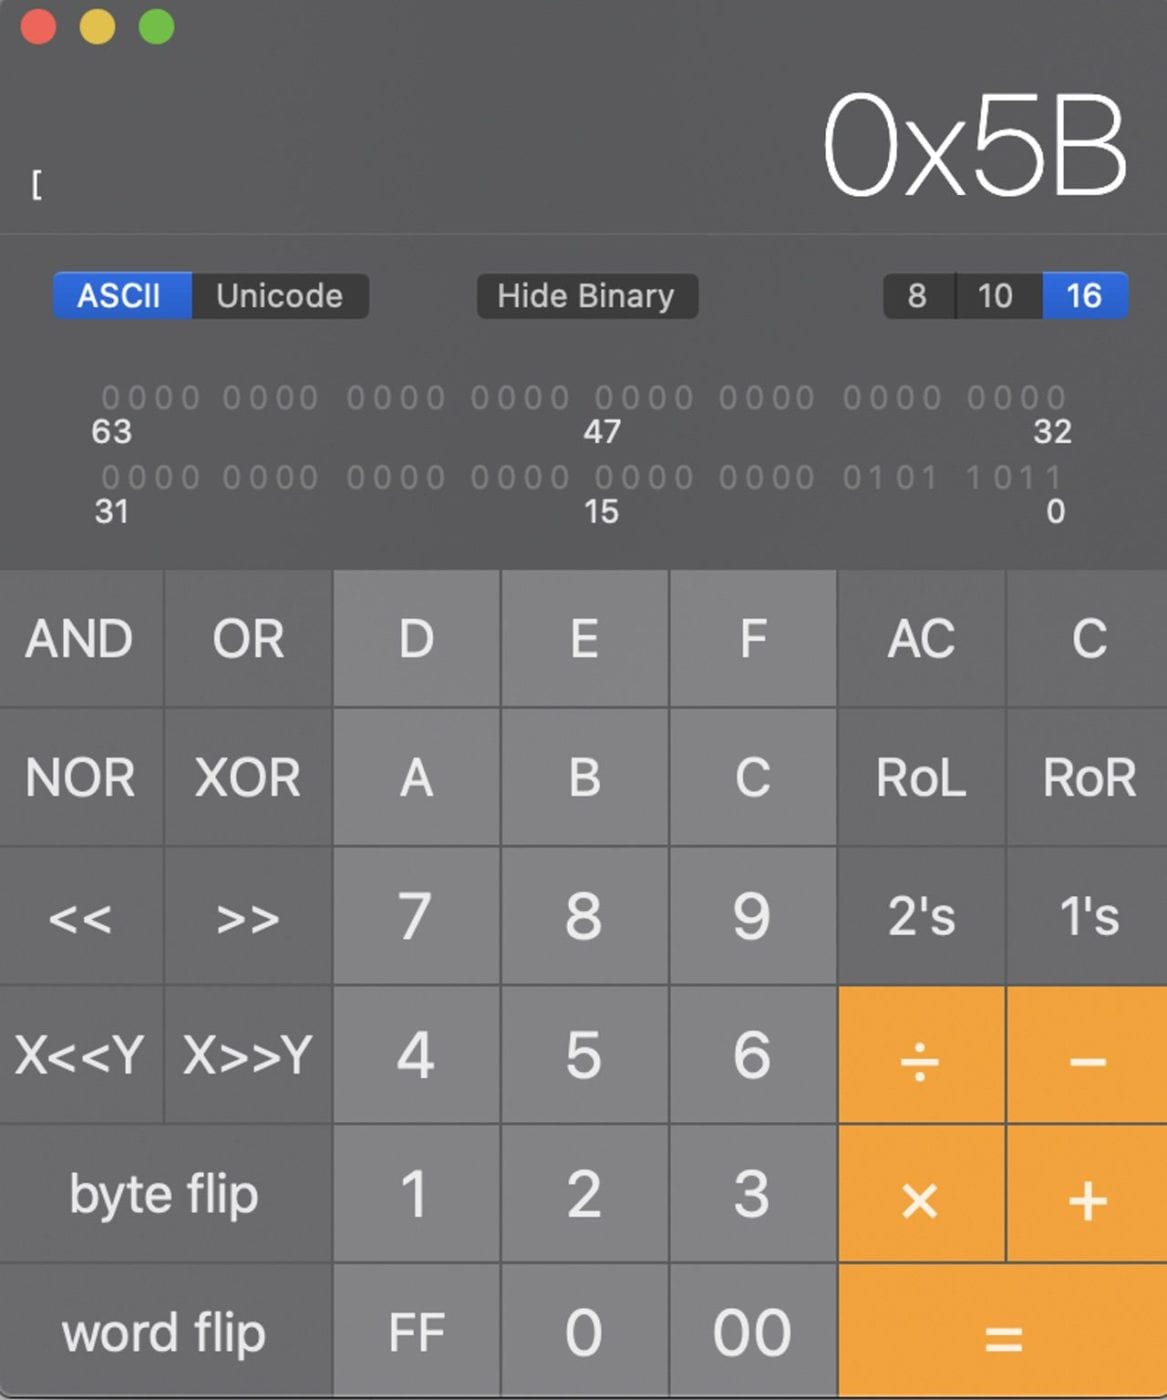 The Programmer Calculator mode includes the ability to do calculations in Base 10, Binary, Octal and Hexadecimal